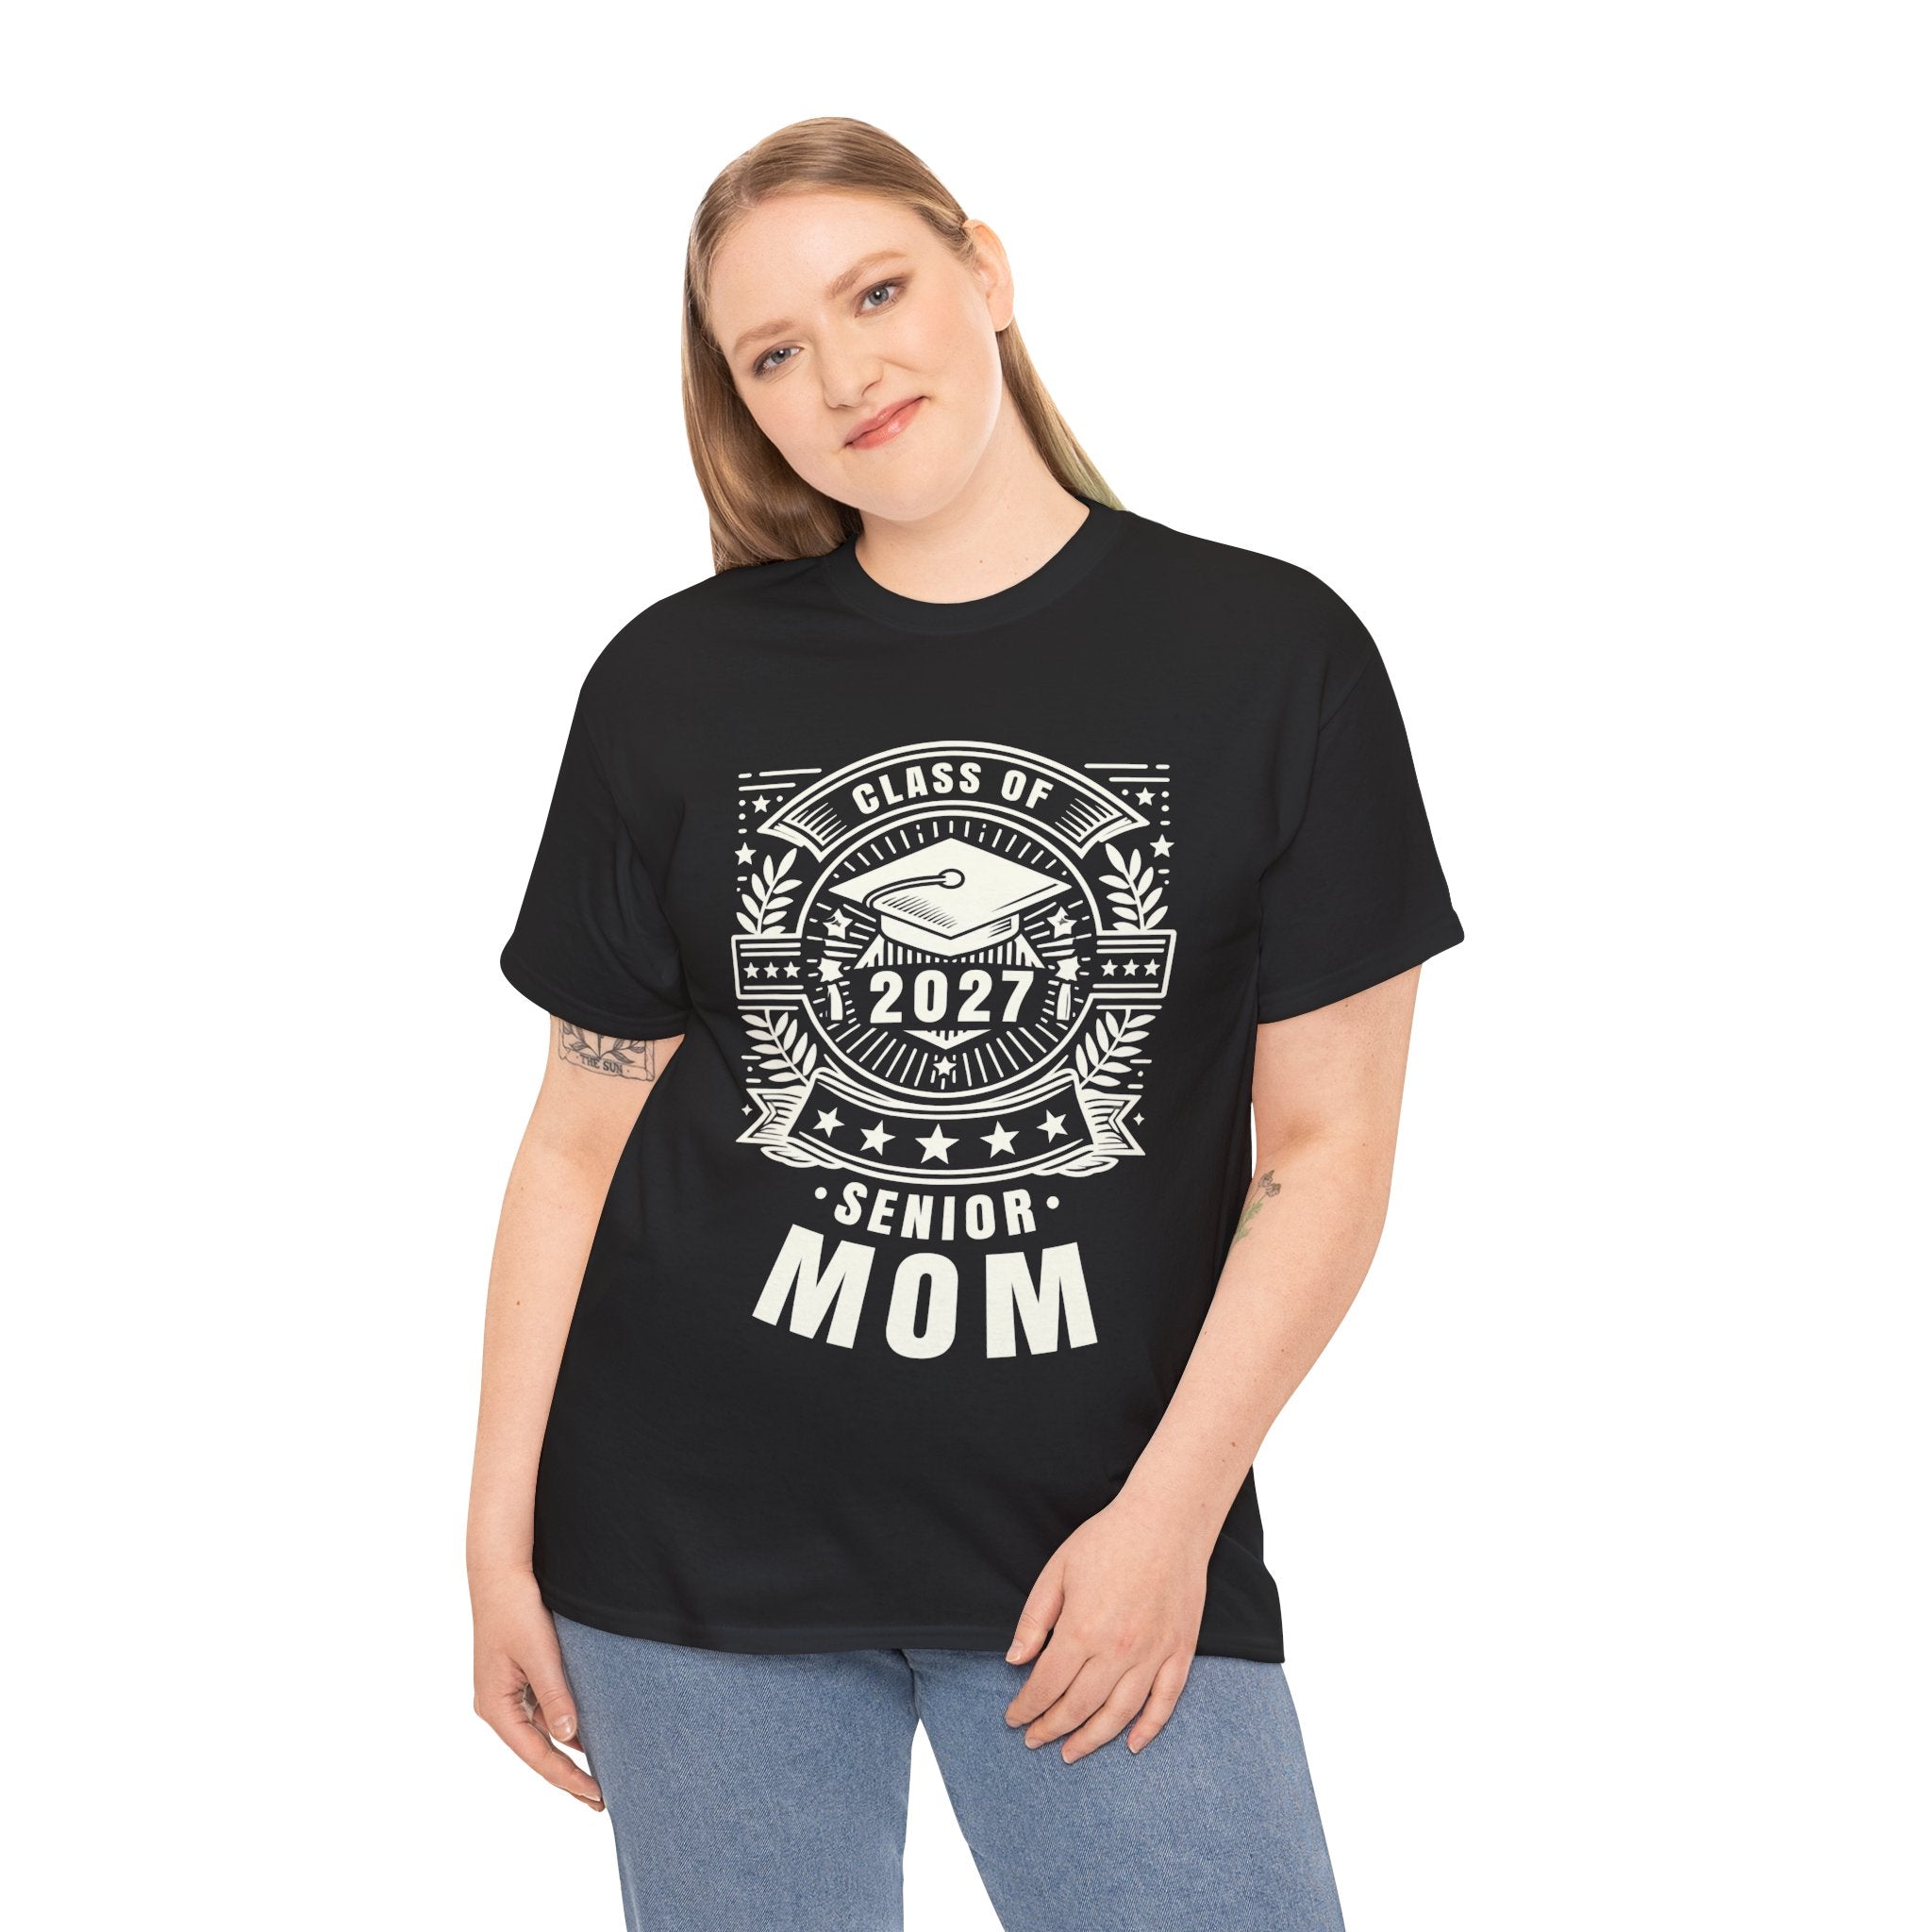 Senior 2027 Class of 2027 for College High School Senior Mom Plus Size Clothing for Women